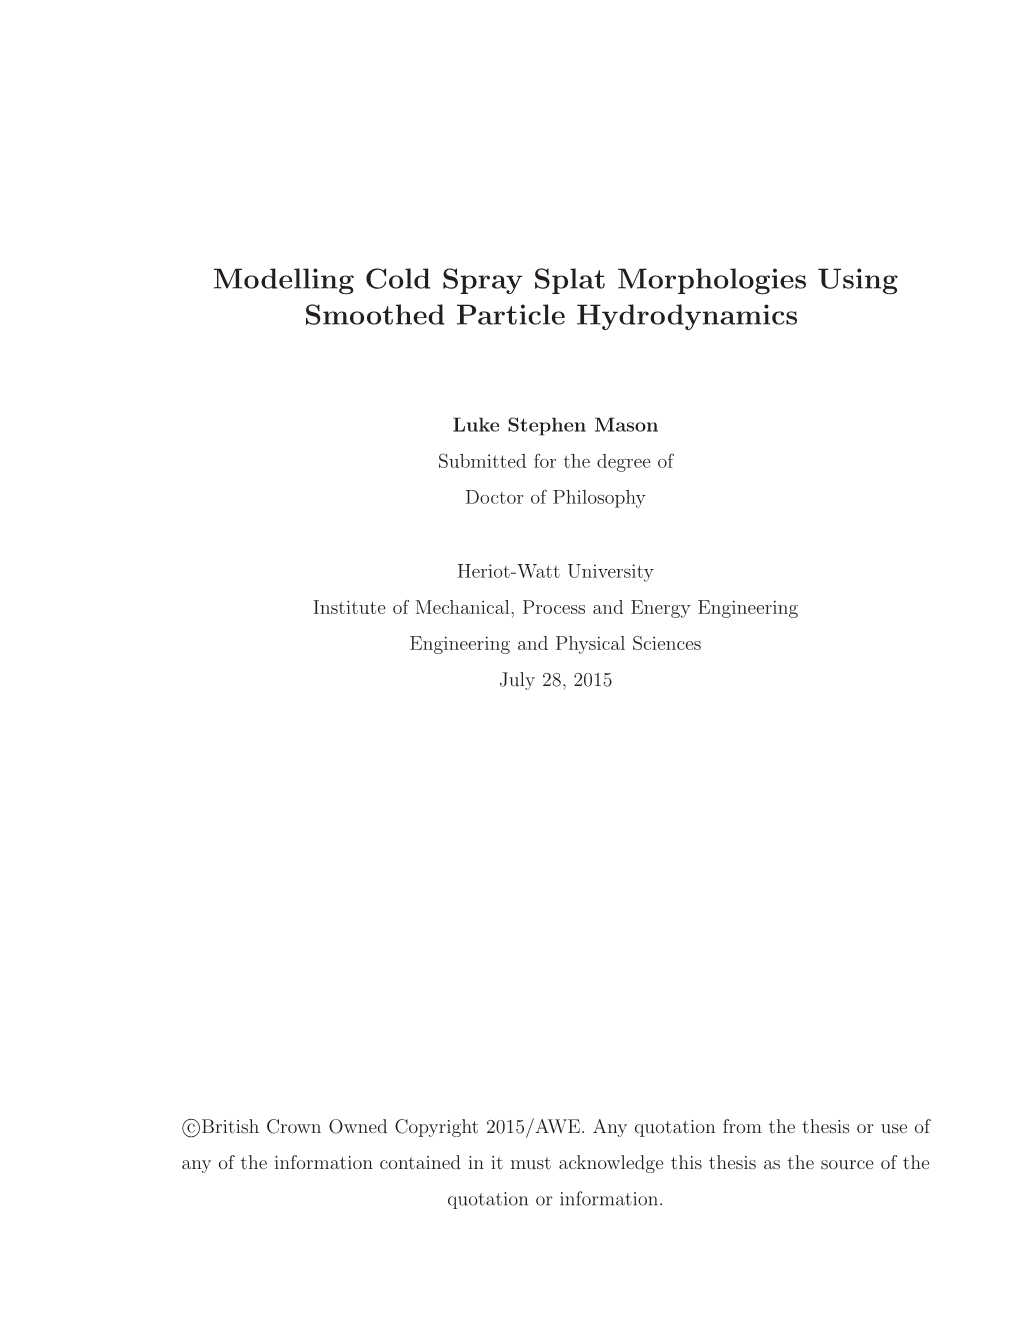 Modelling Cold Spray Splat Morphologies Using Smoothed Particle Hydrodynamics